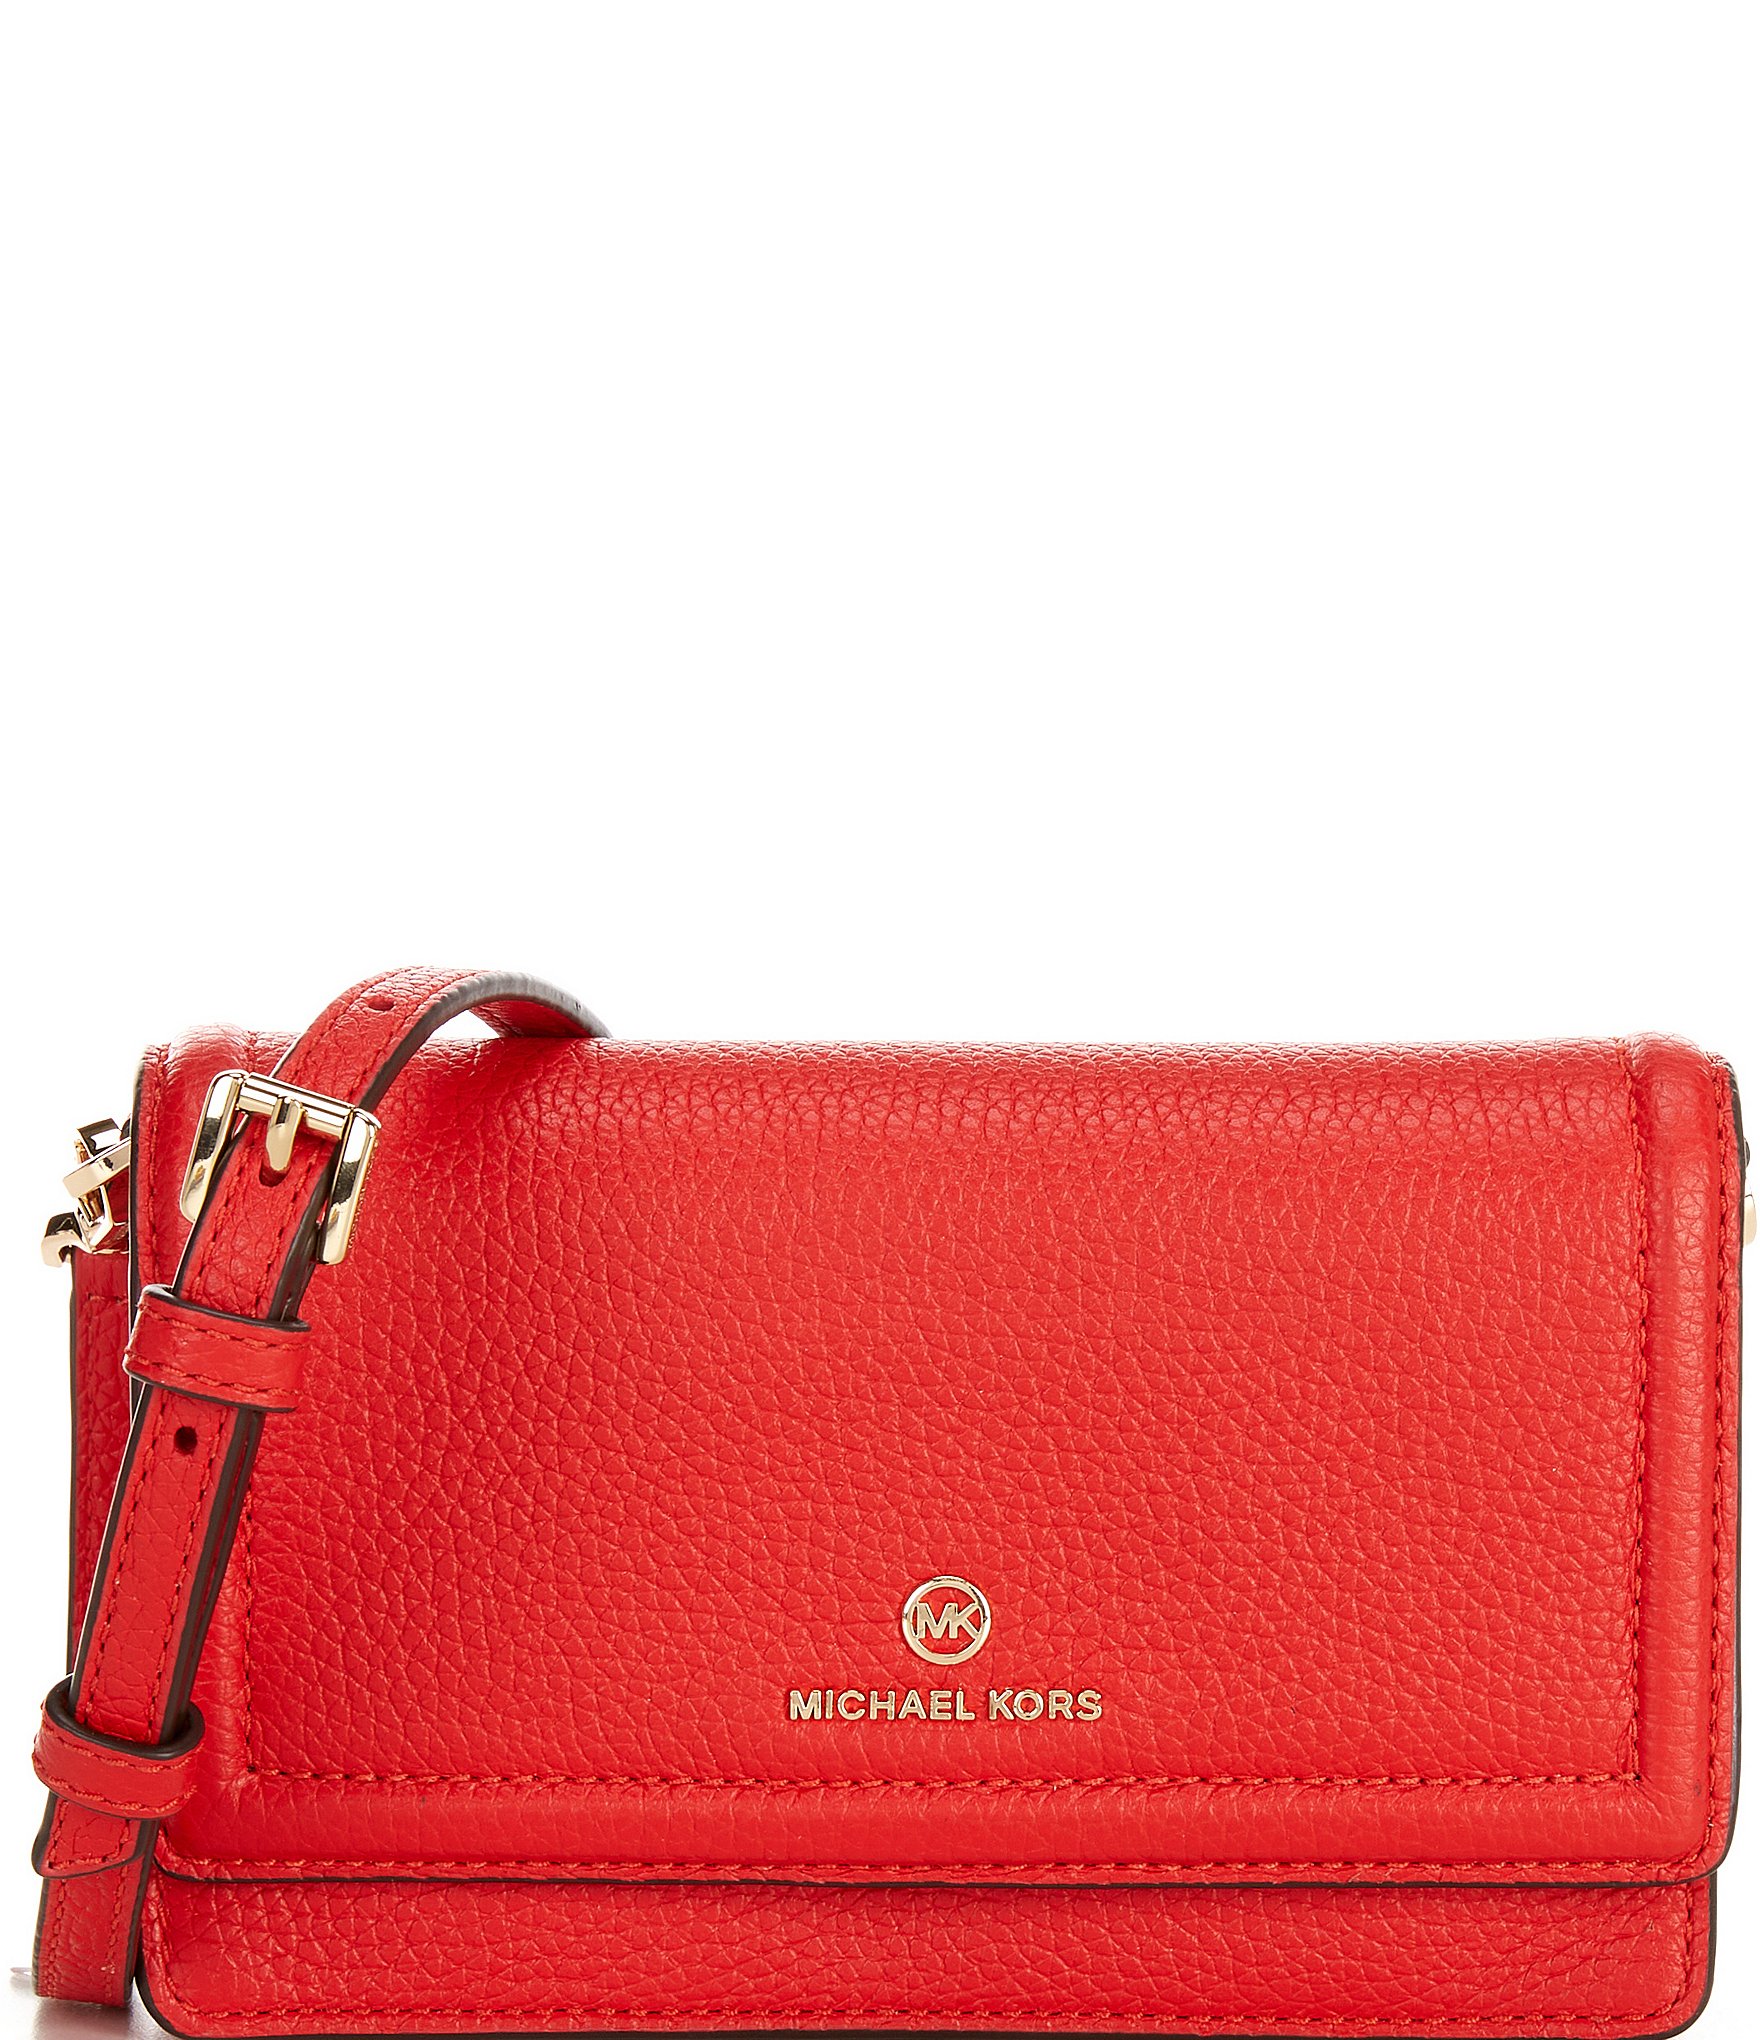 cheap mk purses and wallets Hot Sale - OFF 53%